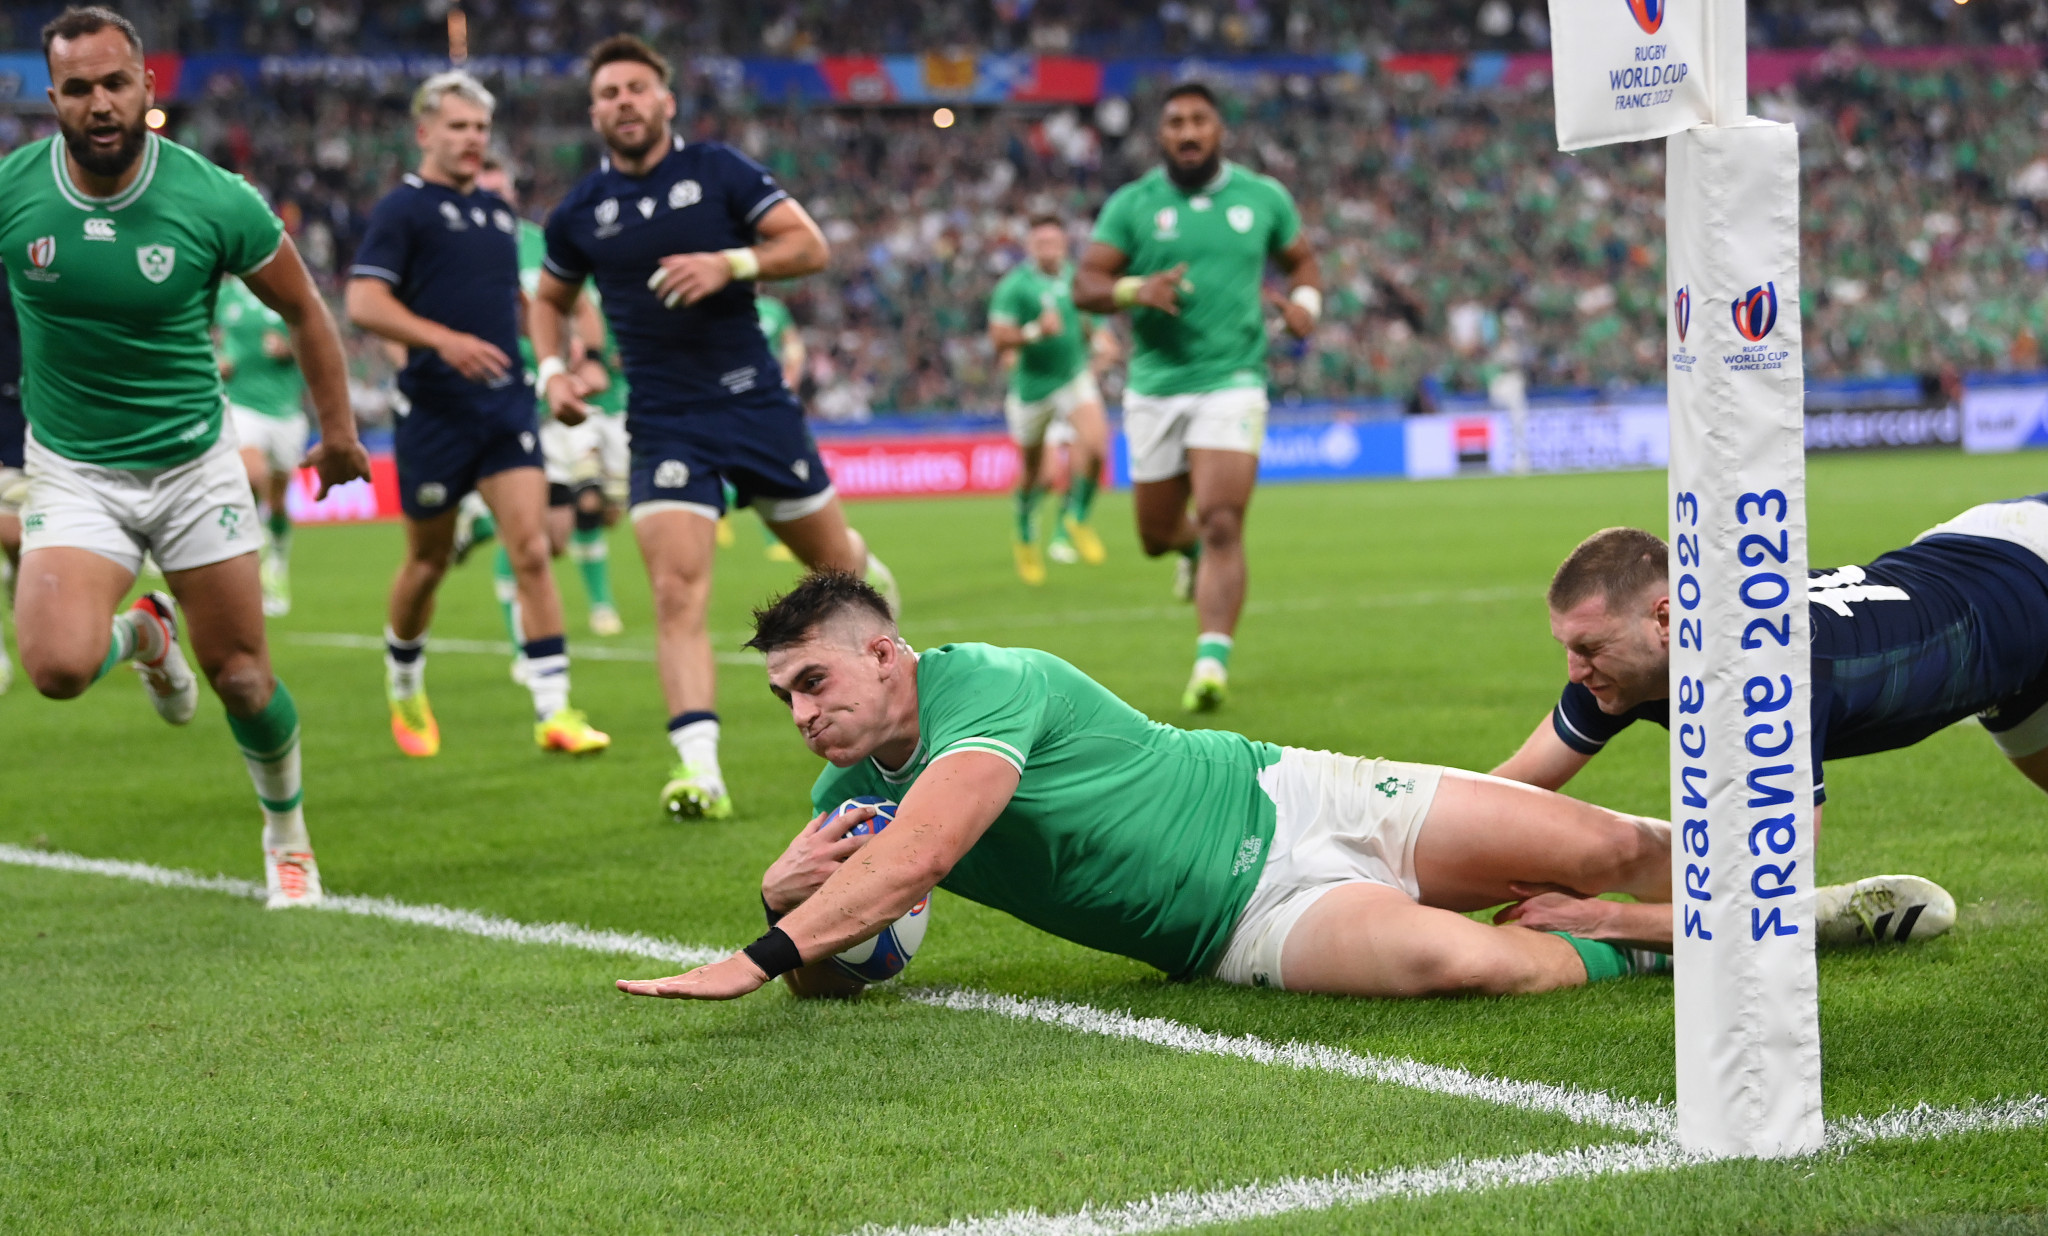 Top ranked Ireland reach Rugby World Cup quarter-finals in style with big win over Scotland